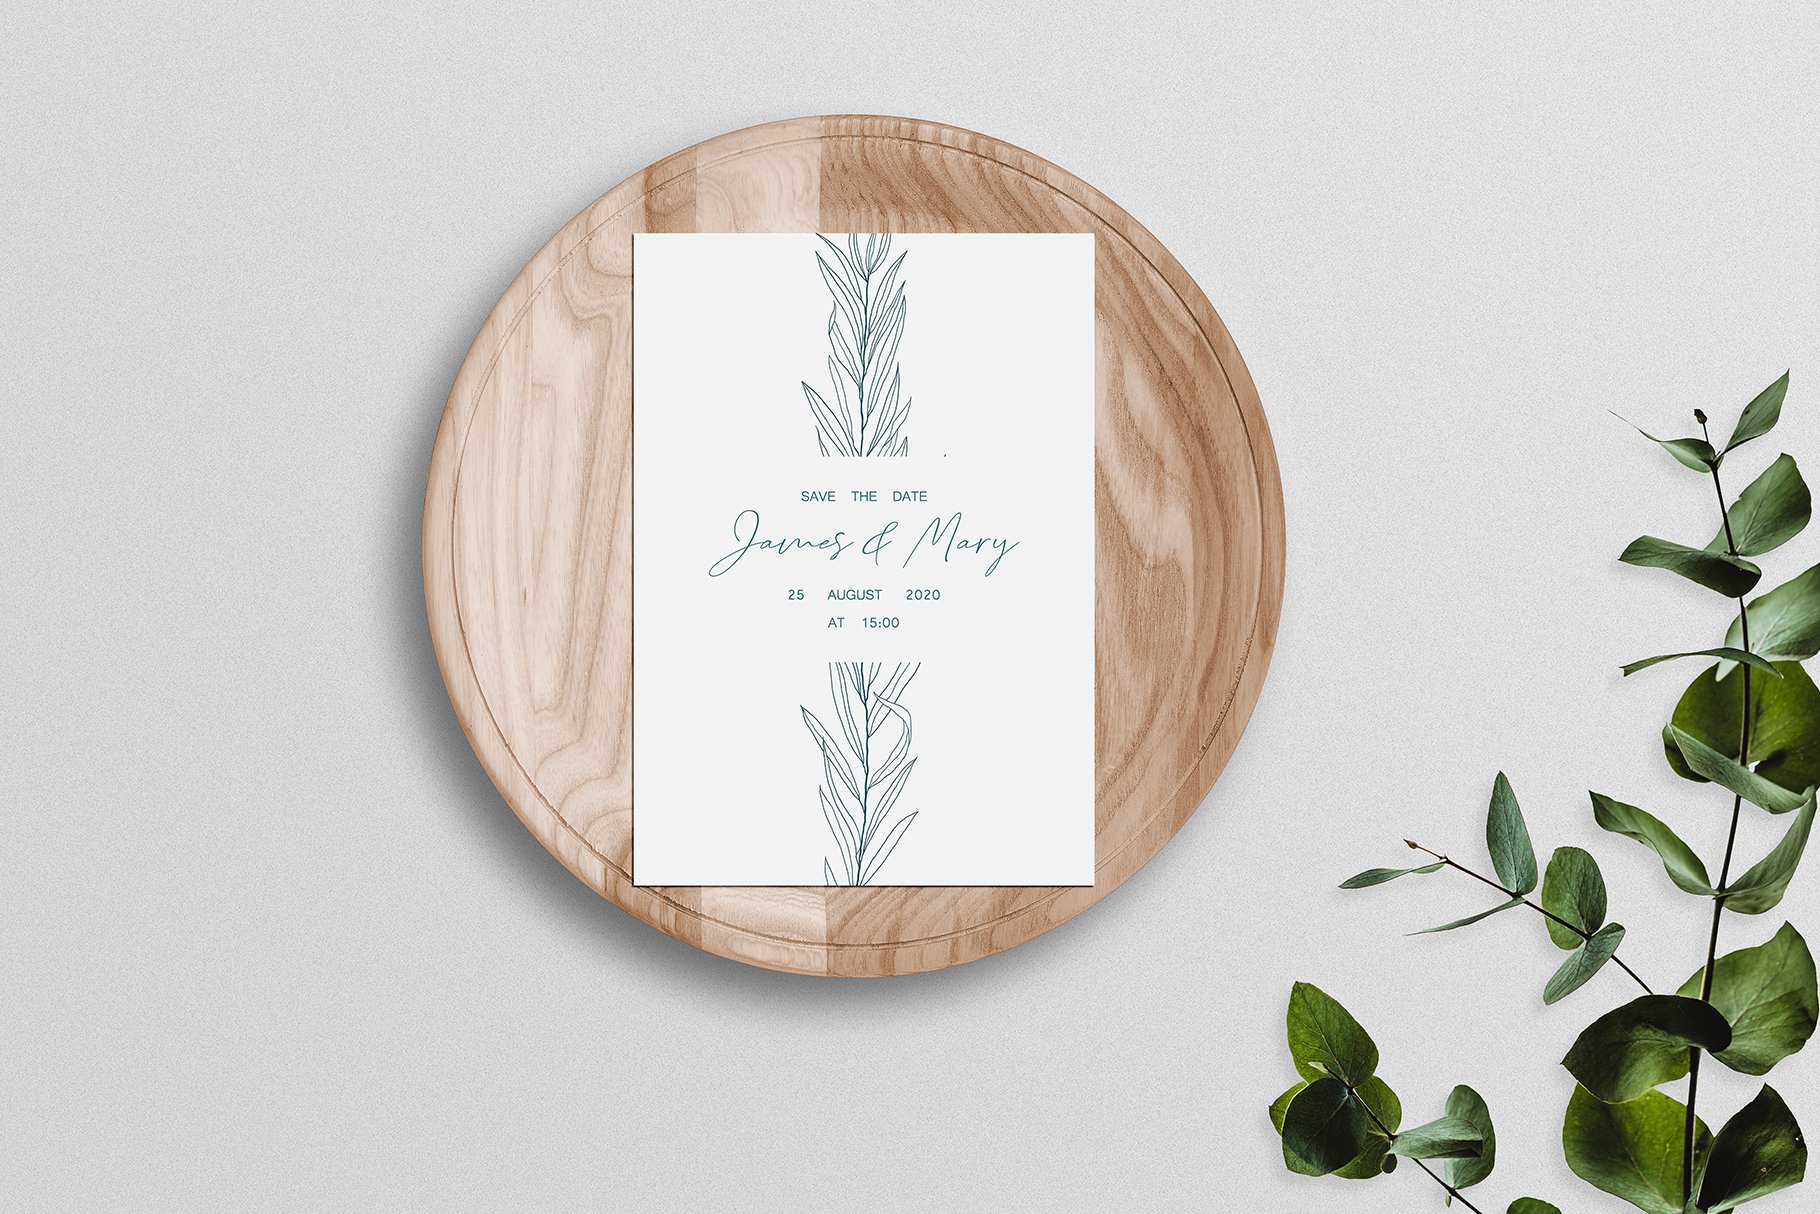 Wooden plate with a card on it next to a plant.